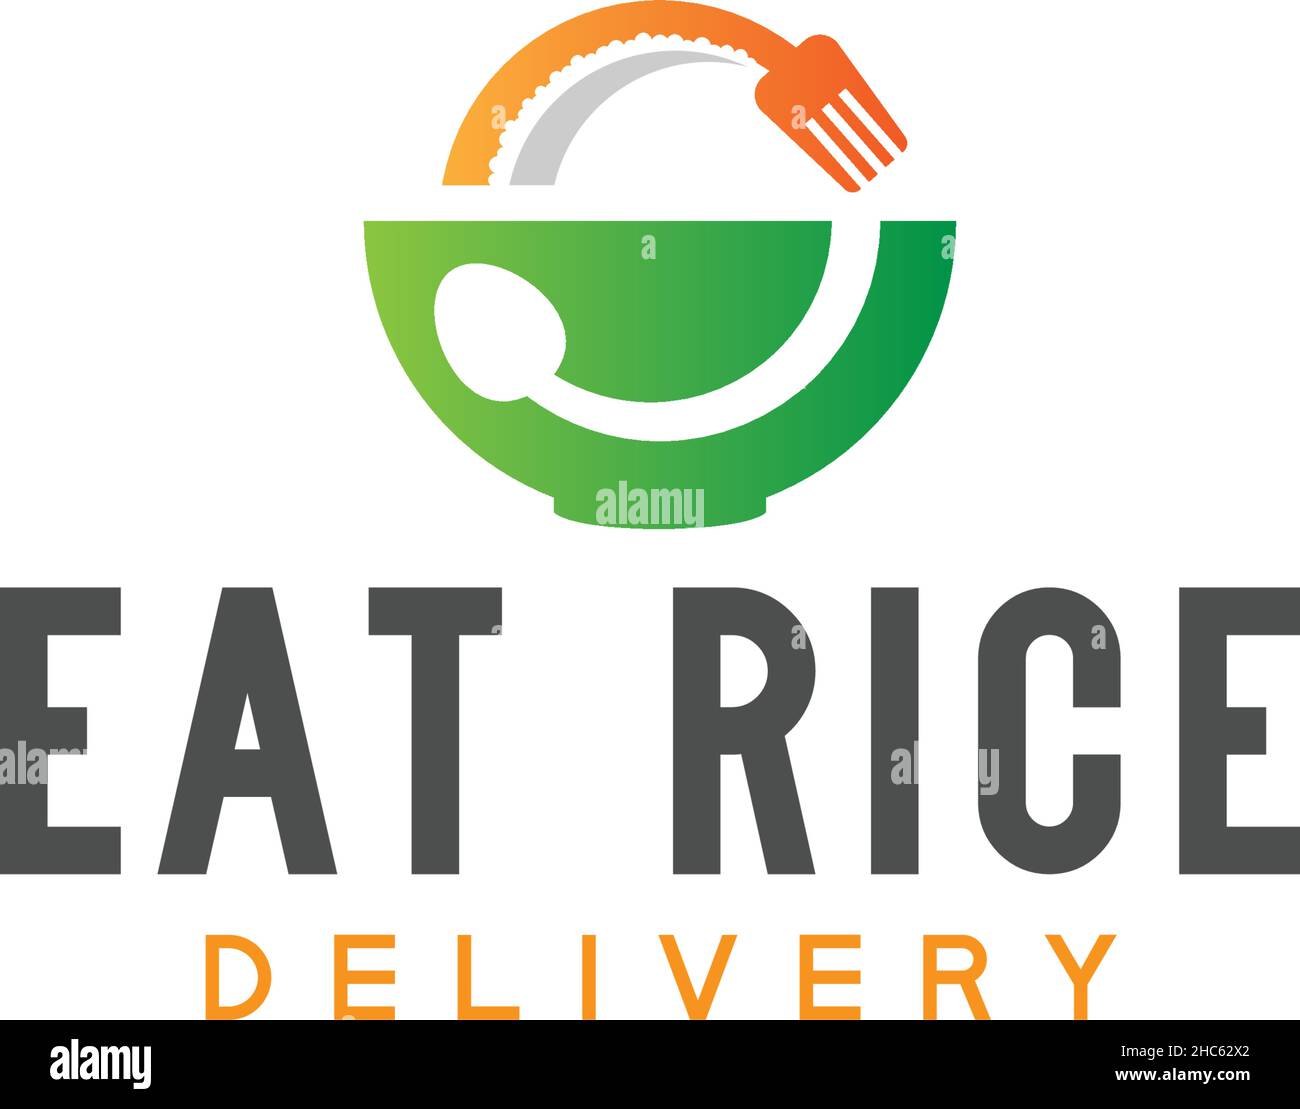 Modern colorful EAT RICE delivery logo design Stock Vector